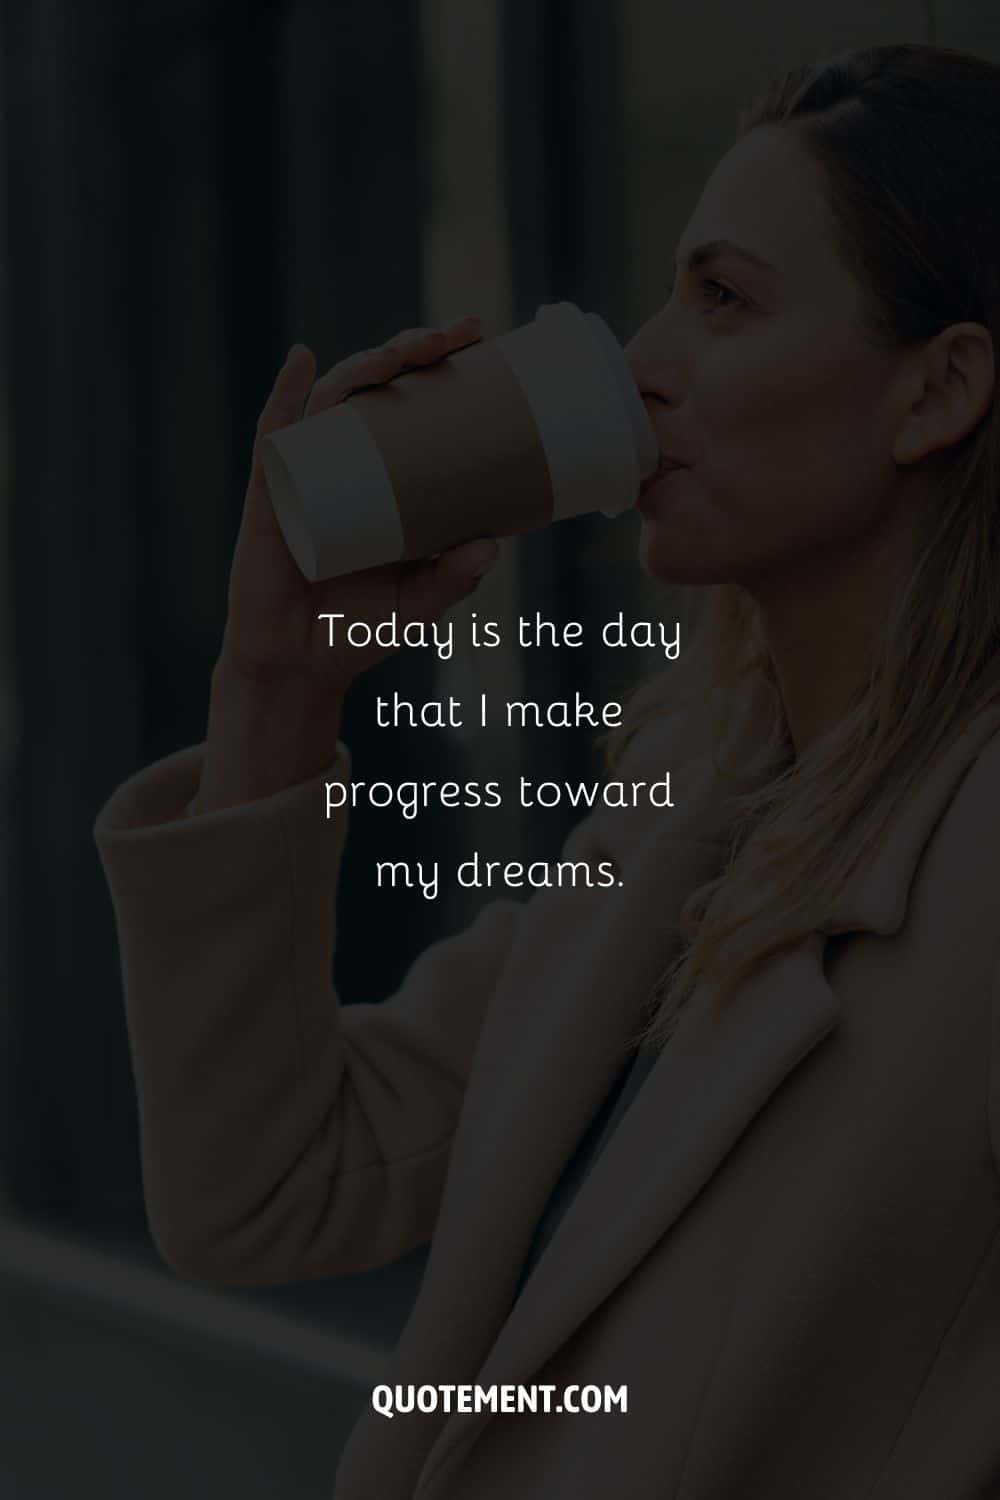 Image of a woman drinking from a cup representing Tuesday affirmation for work.
